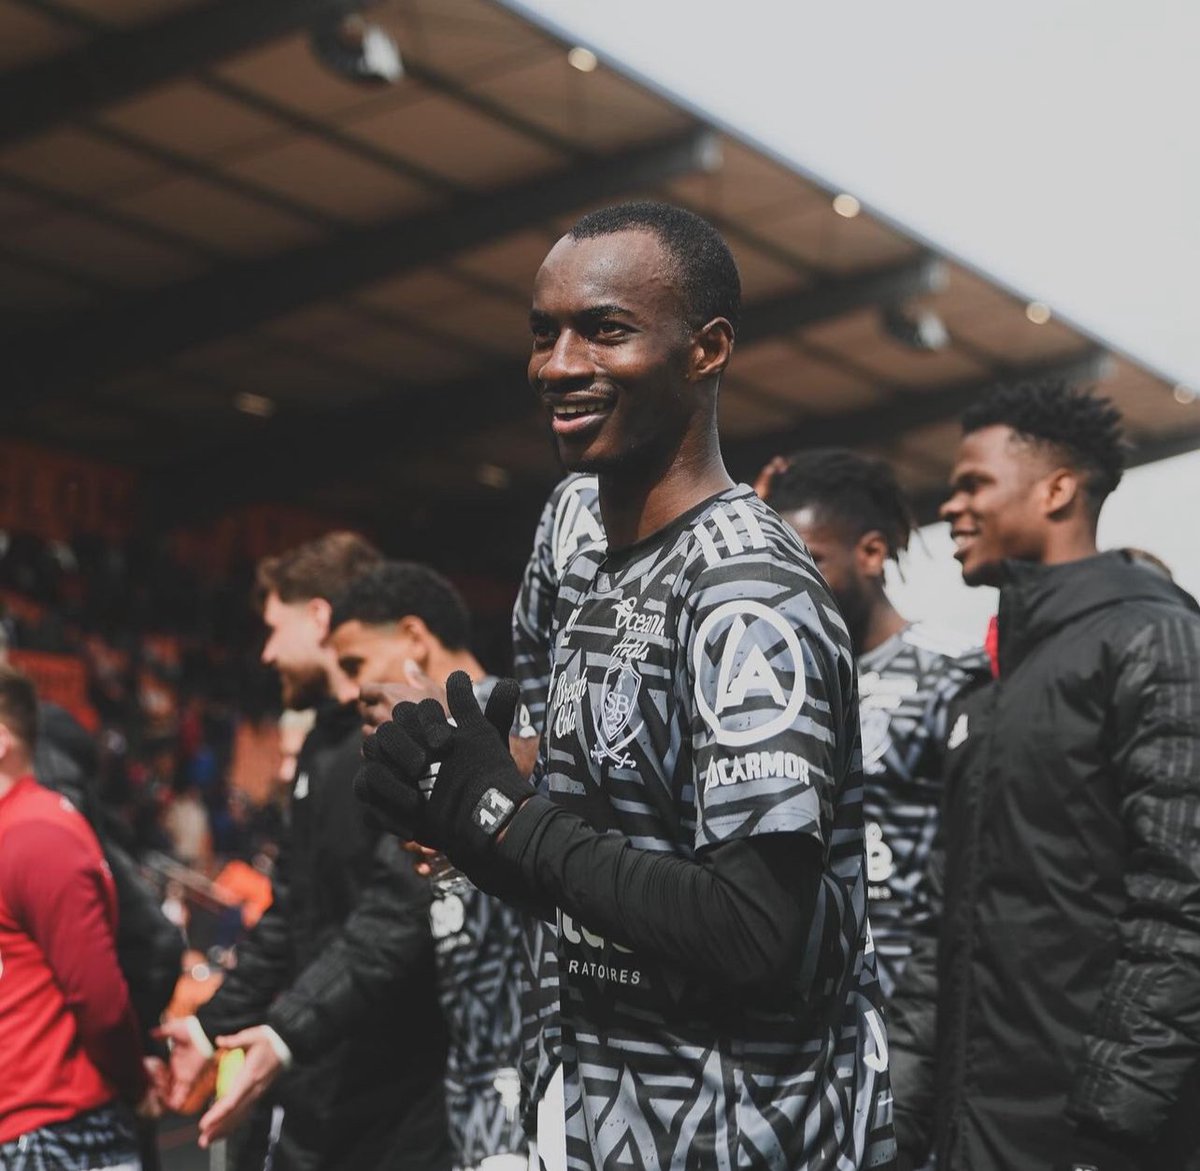 🇲🇱 Kamory Doumbia (21) for 2nd place @SB29 in Ligue 1 this season: ☑️ 4 starts ⚽️ 6 goals 🅰️ 3 assists 🔥 A goal & assist in his last 2 games 🇲🇱 Impressed with Mali at AFCON On loan from Reims but helping Brest to Champions League! 🤩